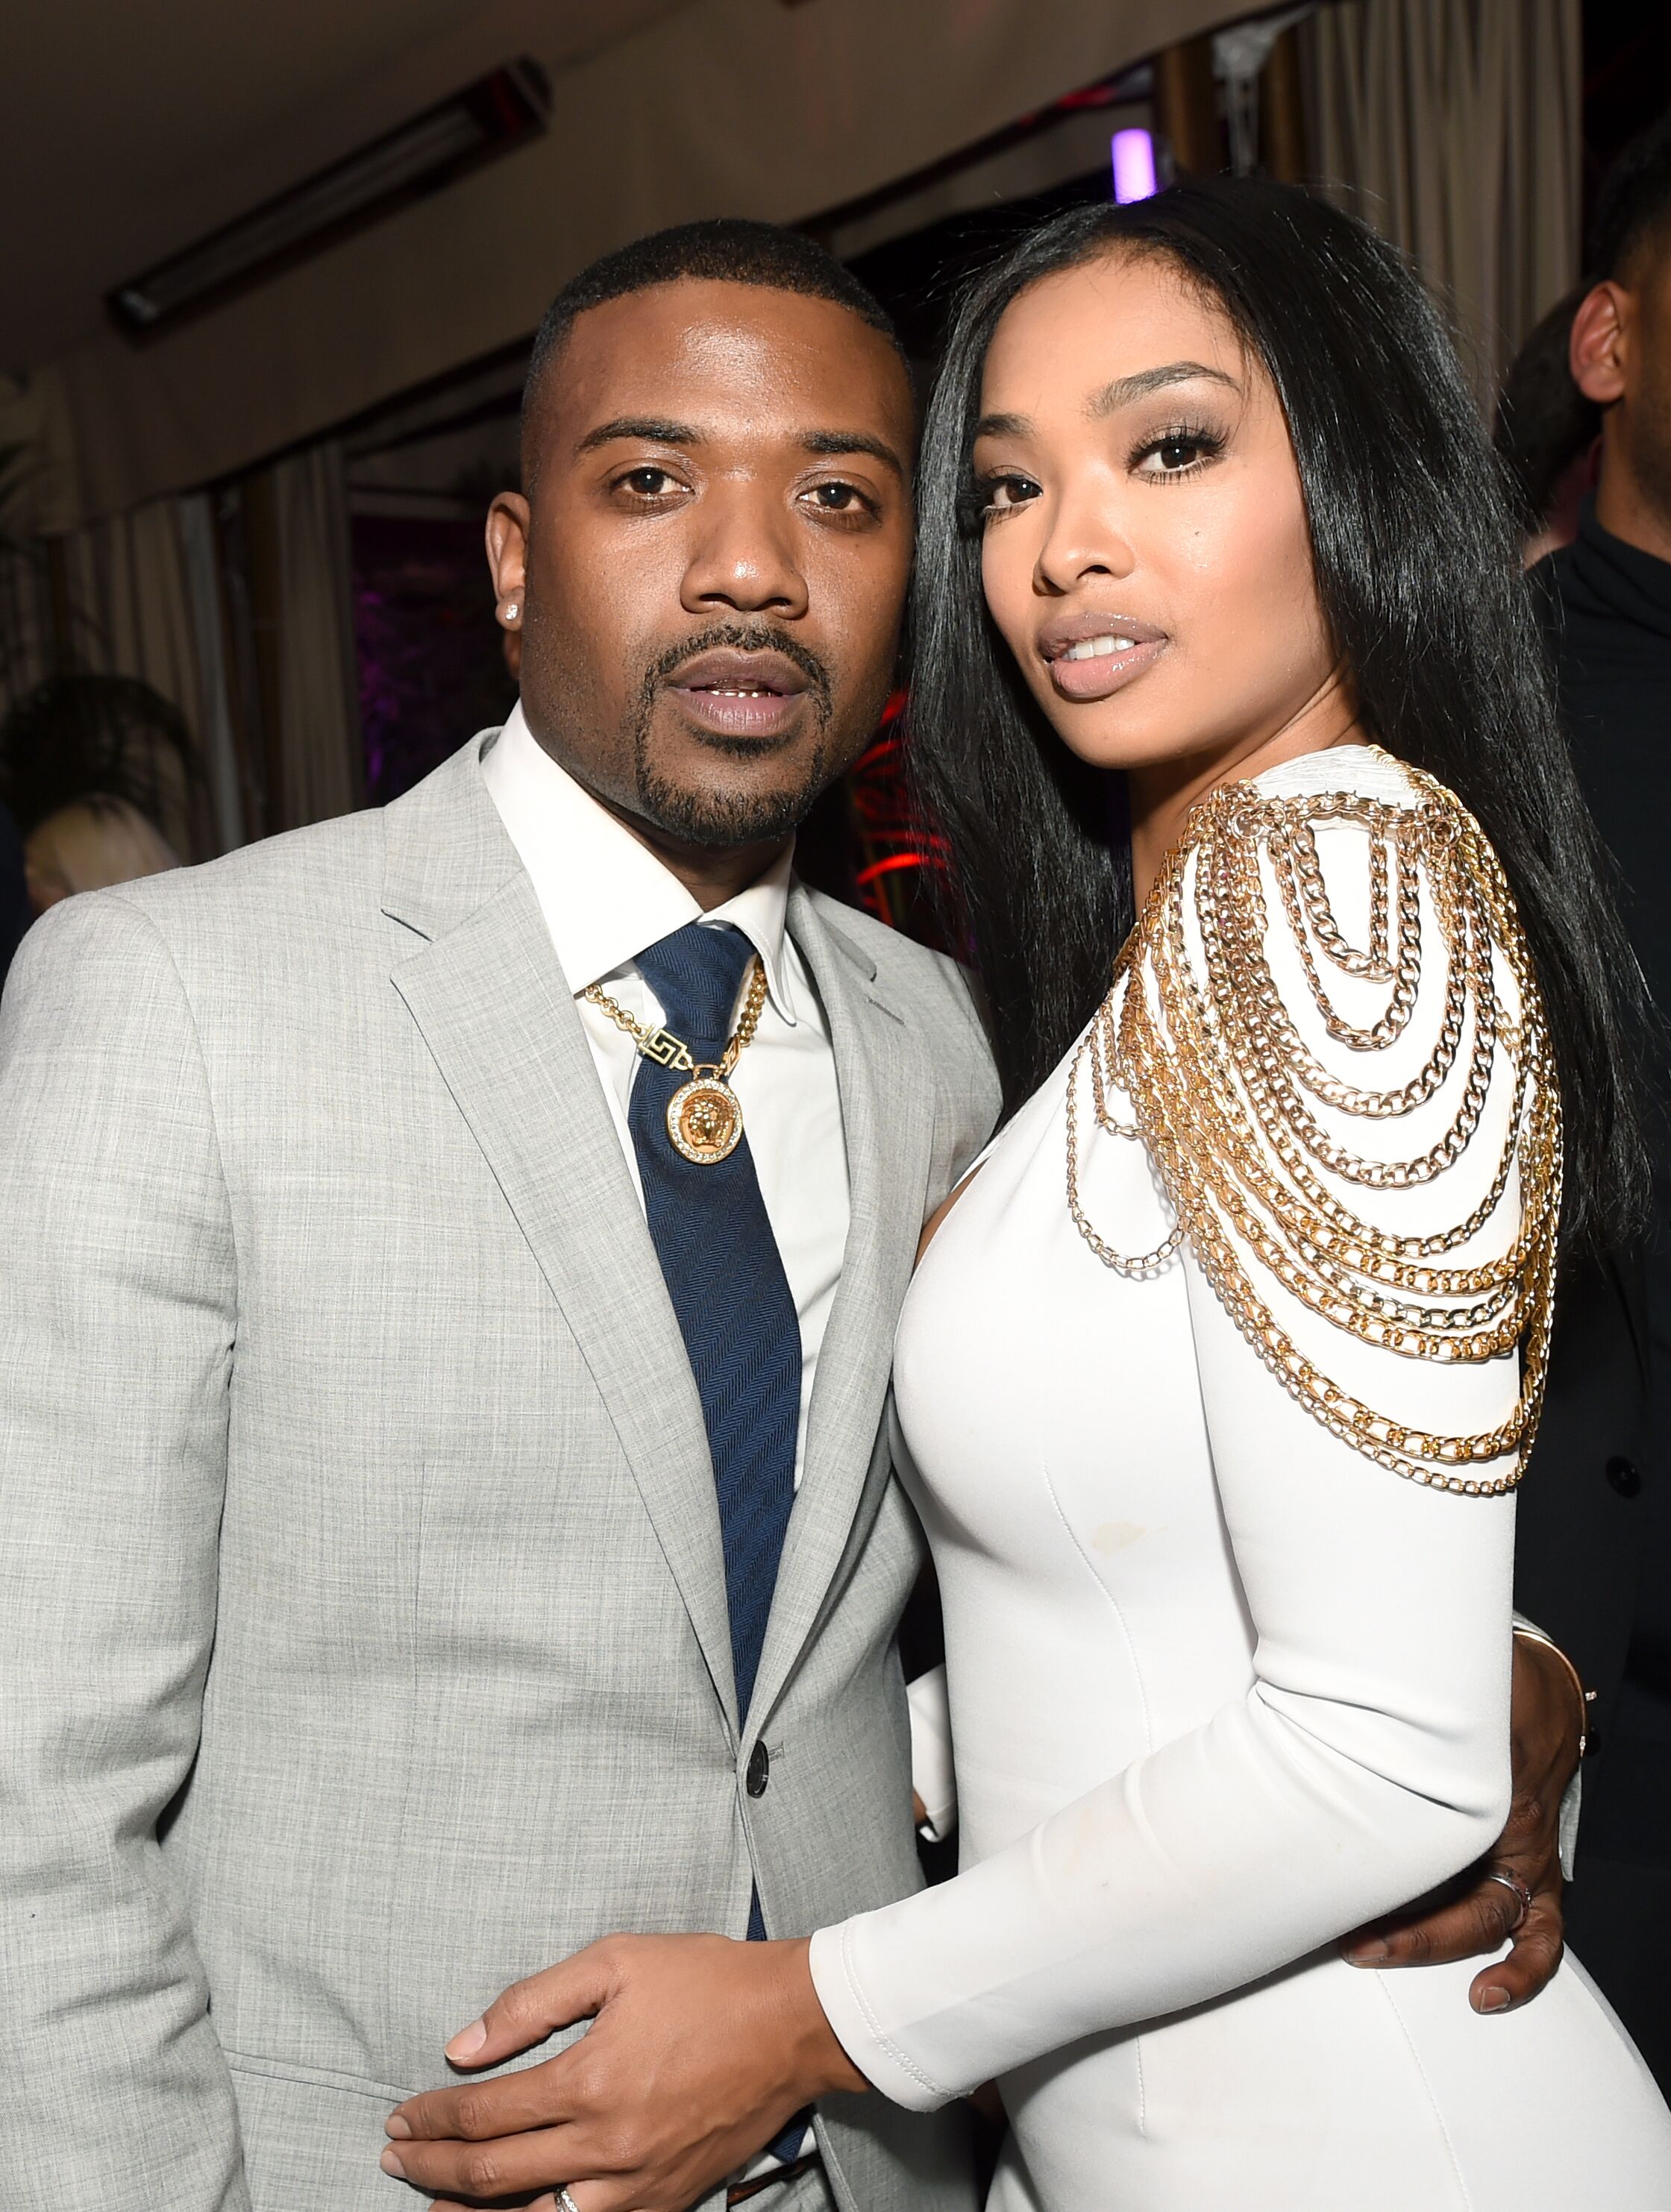 Ray J and Princess Love attend a formal event | Source: Getty Images/GlobalImagesUkraine